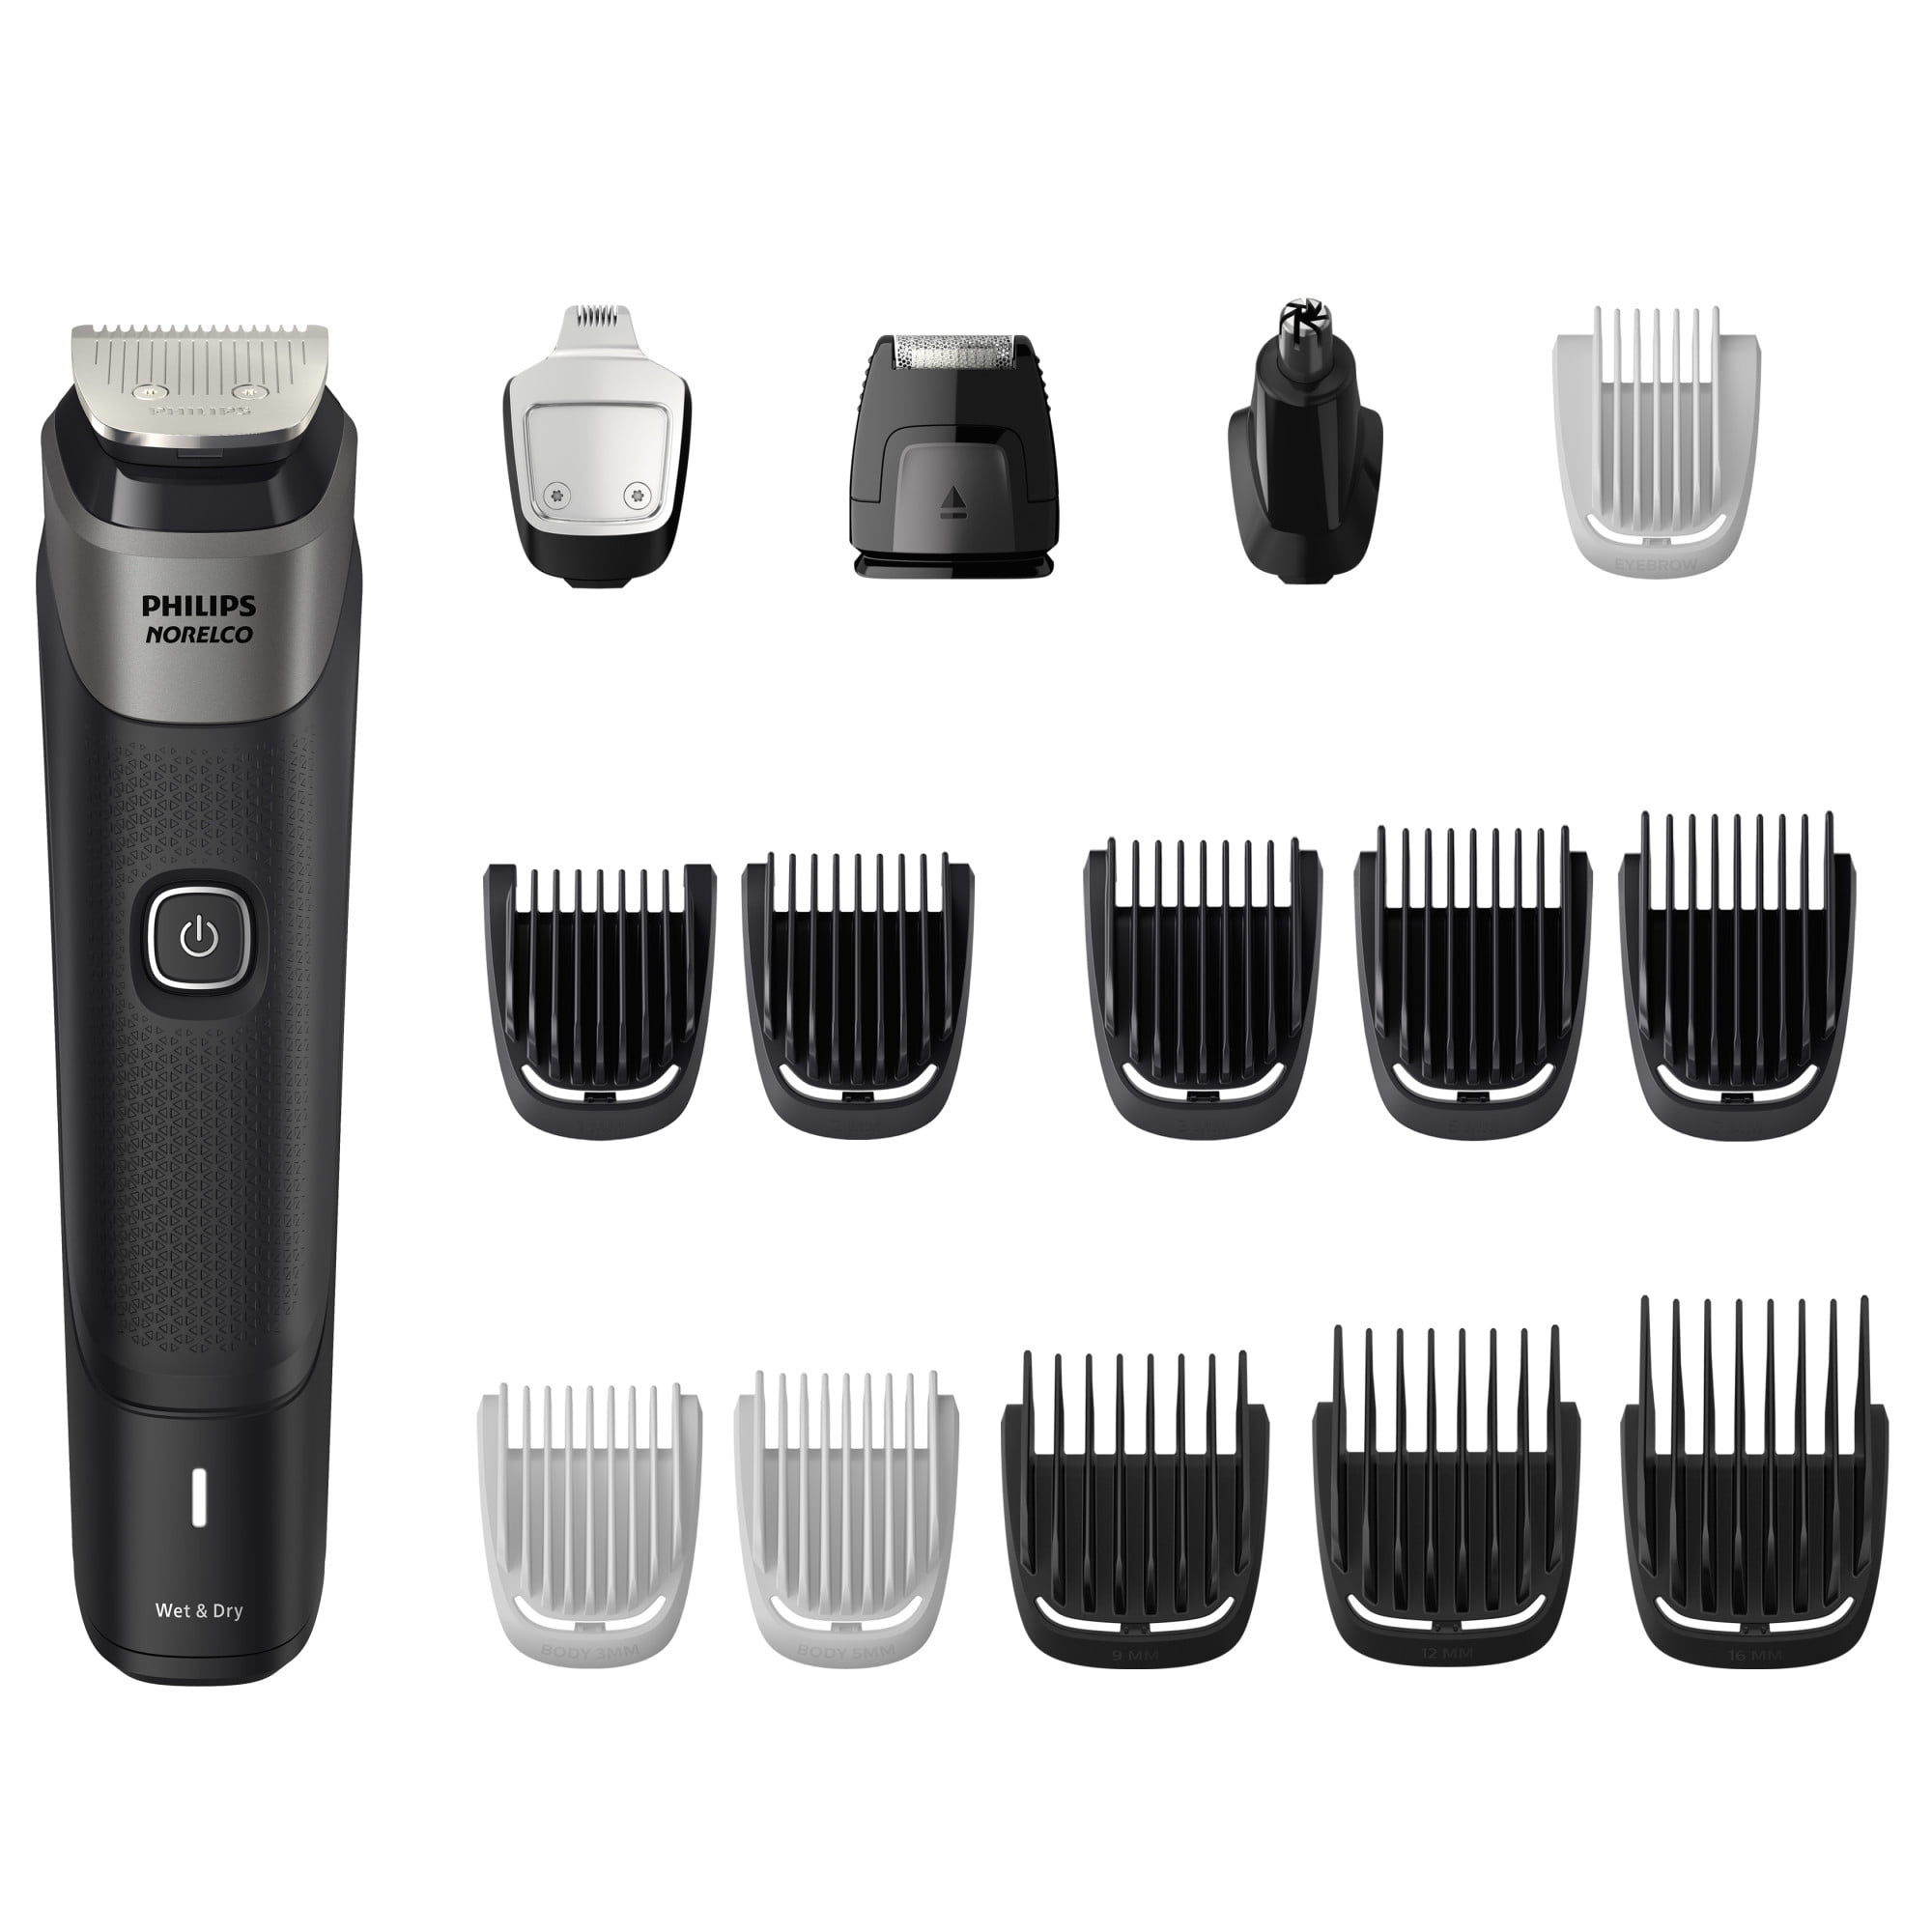 Buy Beurer Mens Grooming Kit Trimmer  Shaver  Body Groomer  Precision  Trimmer  Hair Clipper 1s Online at Best Price  Tools  Accessories